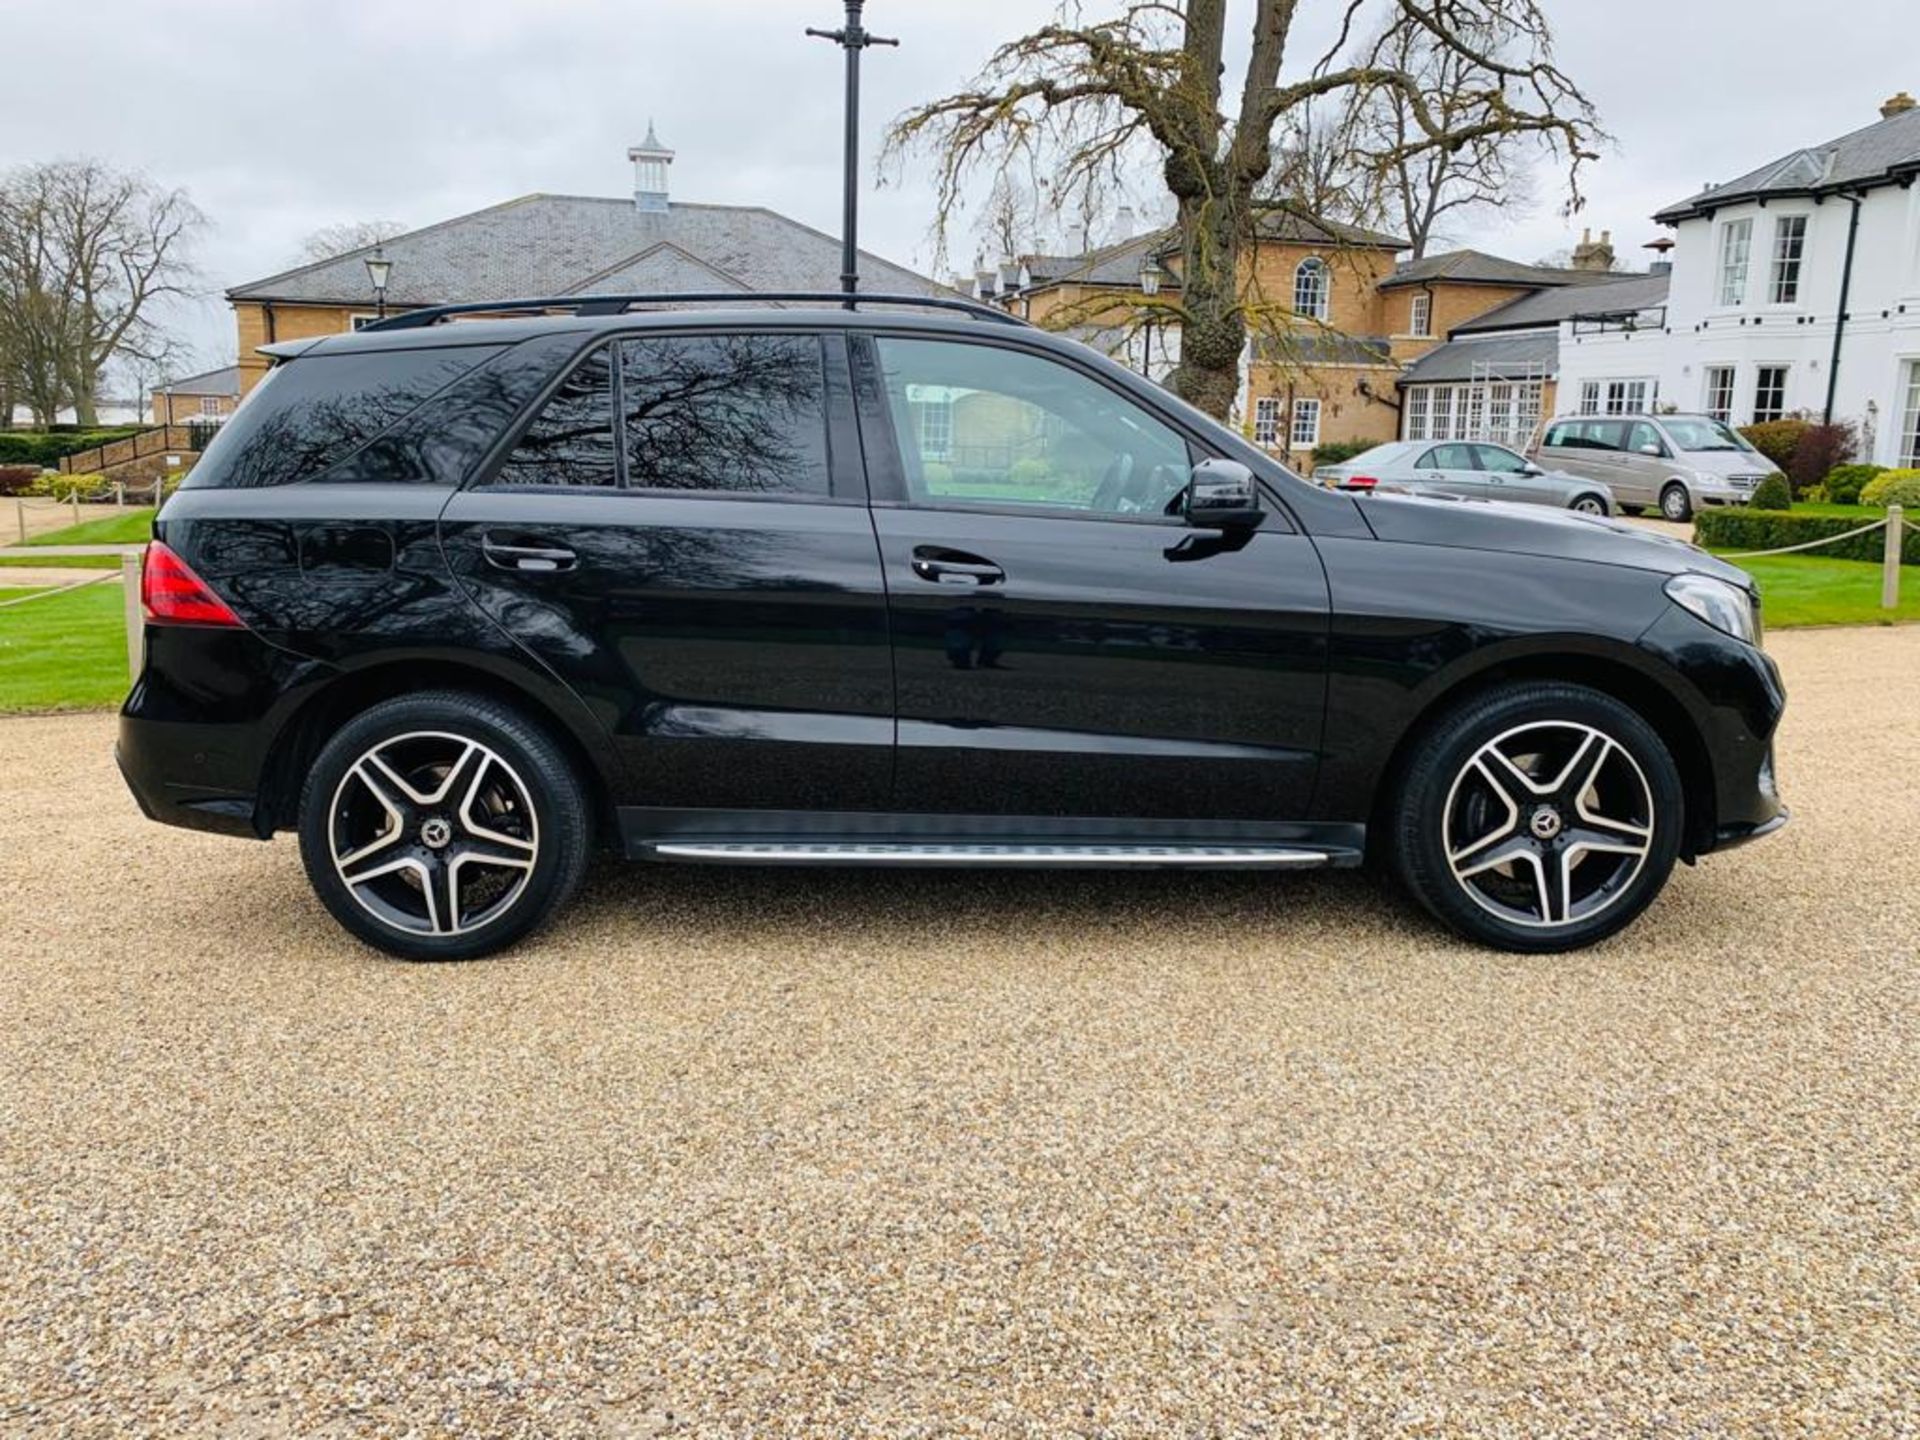 (RESERVE MET) Mercedes GLE 250d 4Matic AMG Night Edition 9G Tronic - 2018 18 Reg - Only 33K Miles - - Image 7 of 36